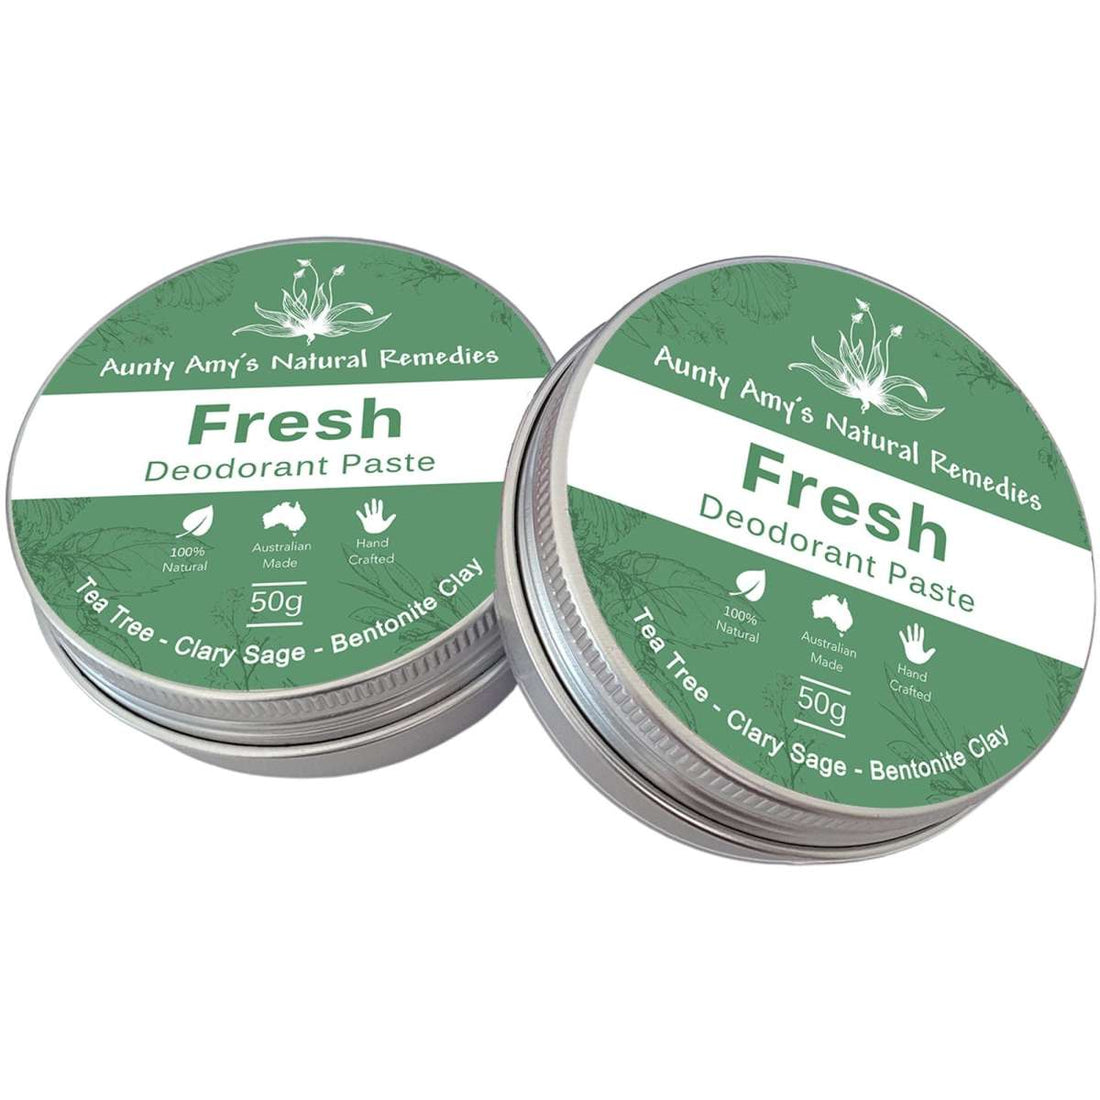 Aunty Amy's Natural Remedies Fresh Deodorant Paste 2 Pack 50g